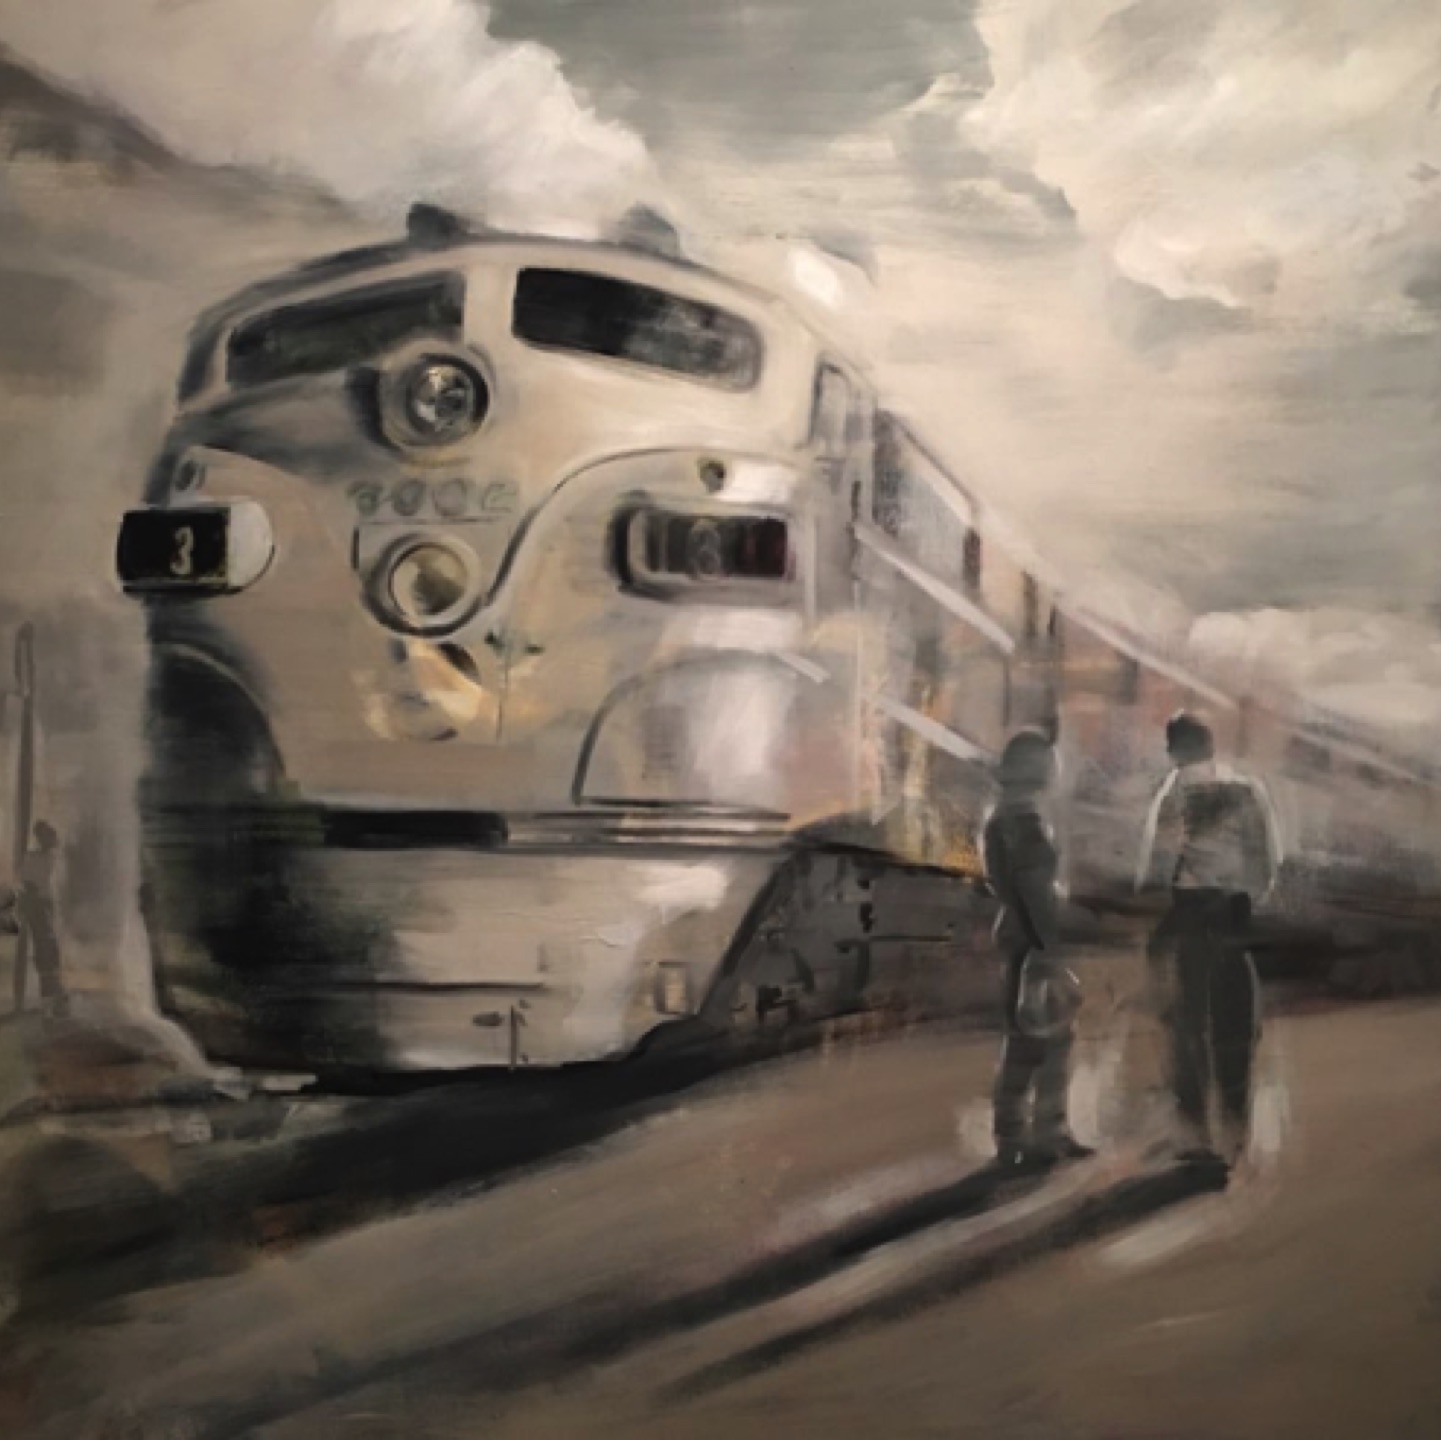 Gregg Chadwick
The Sunset Limited - Palm Springs Station
40"x40"oil on linen 2017
Private Collection, Phoenix, Arizona
Sold by Saatchi Art - November 2020